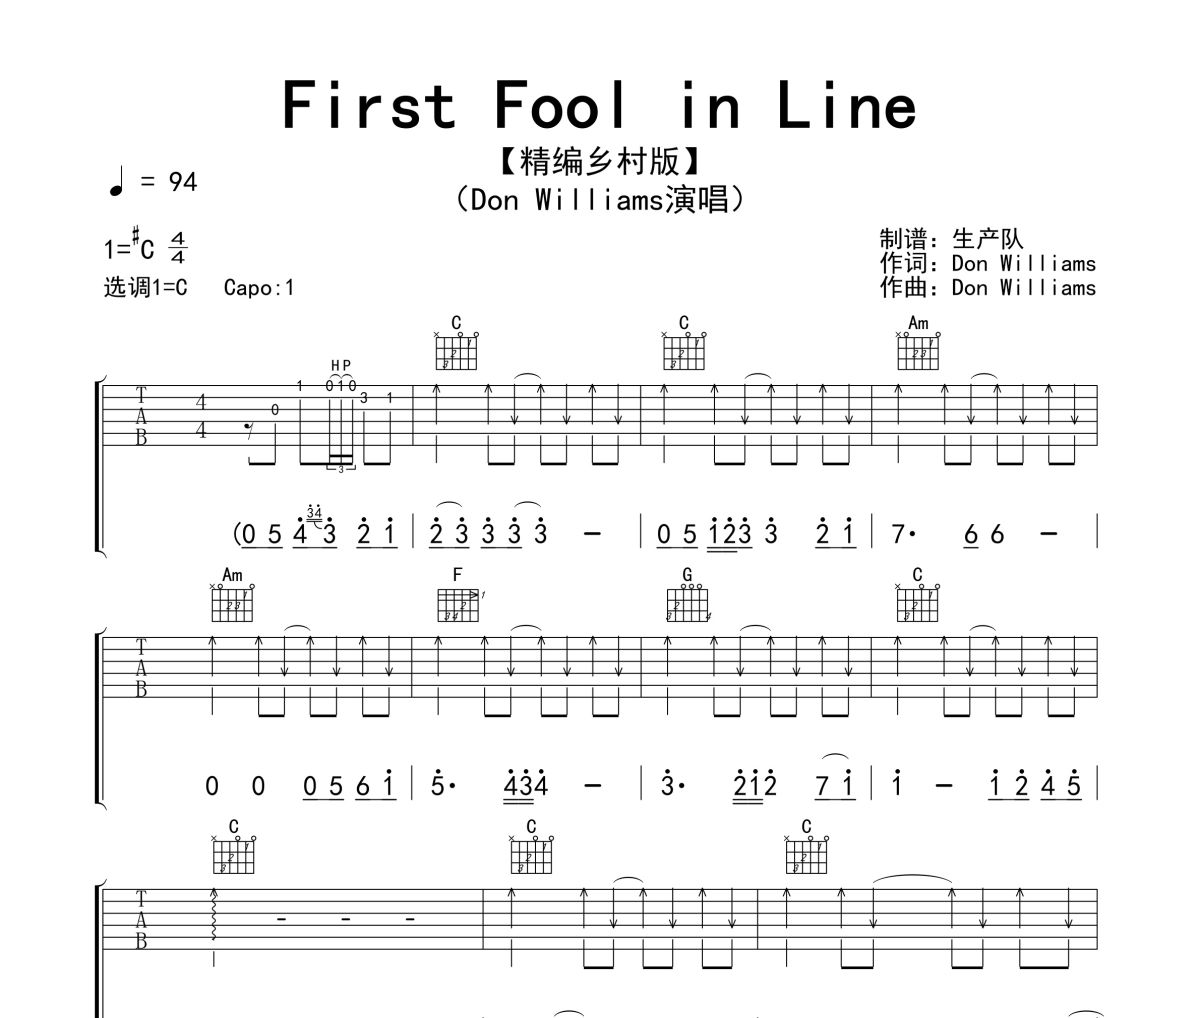 First Fool in Line吉他谱 Don Williams《First Fool in Line》六线谱|吉他